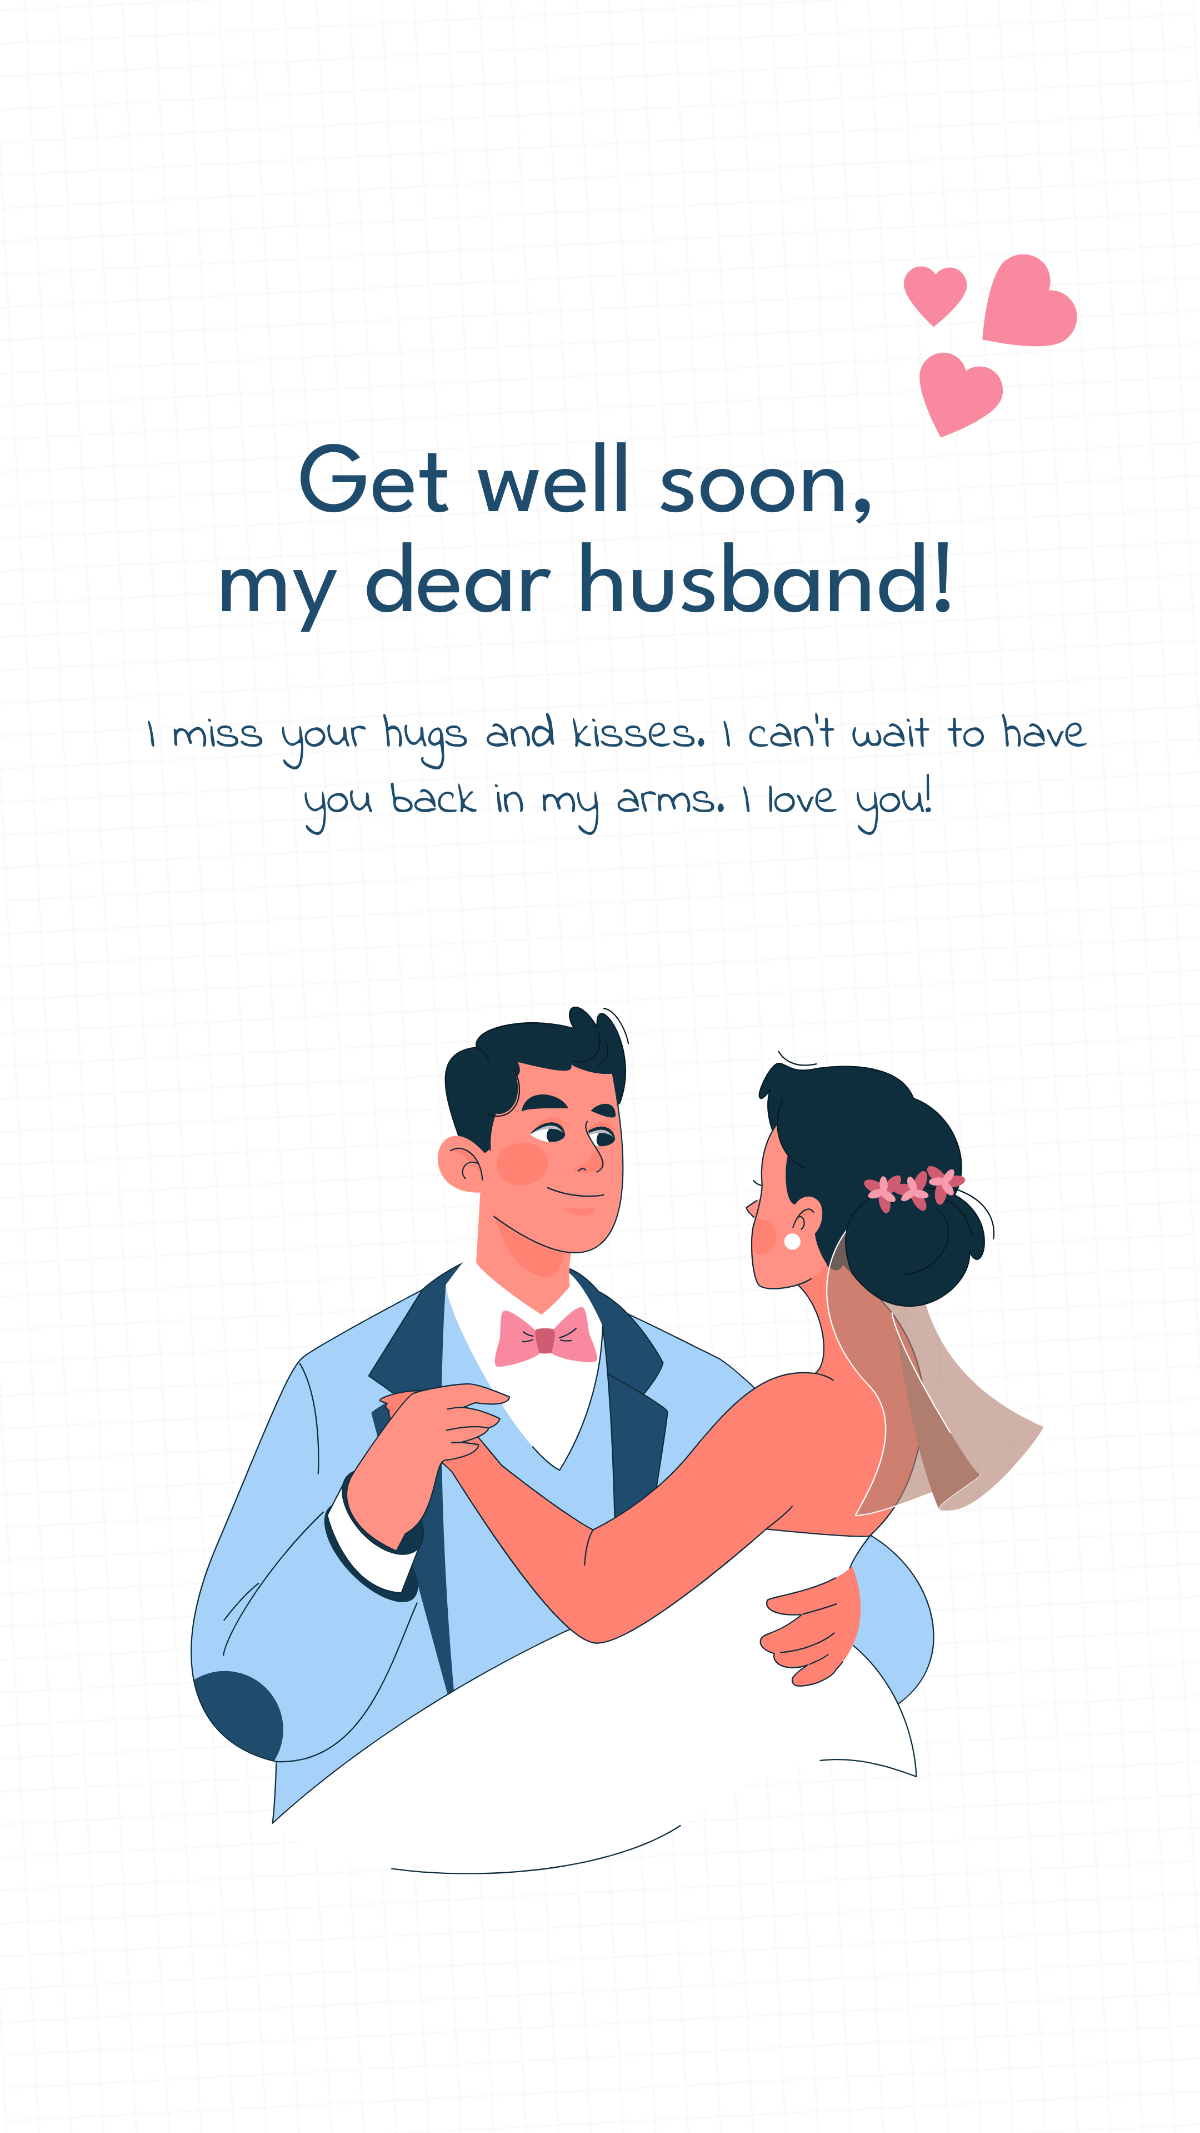 Get Well Soon Message For Husband